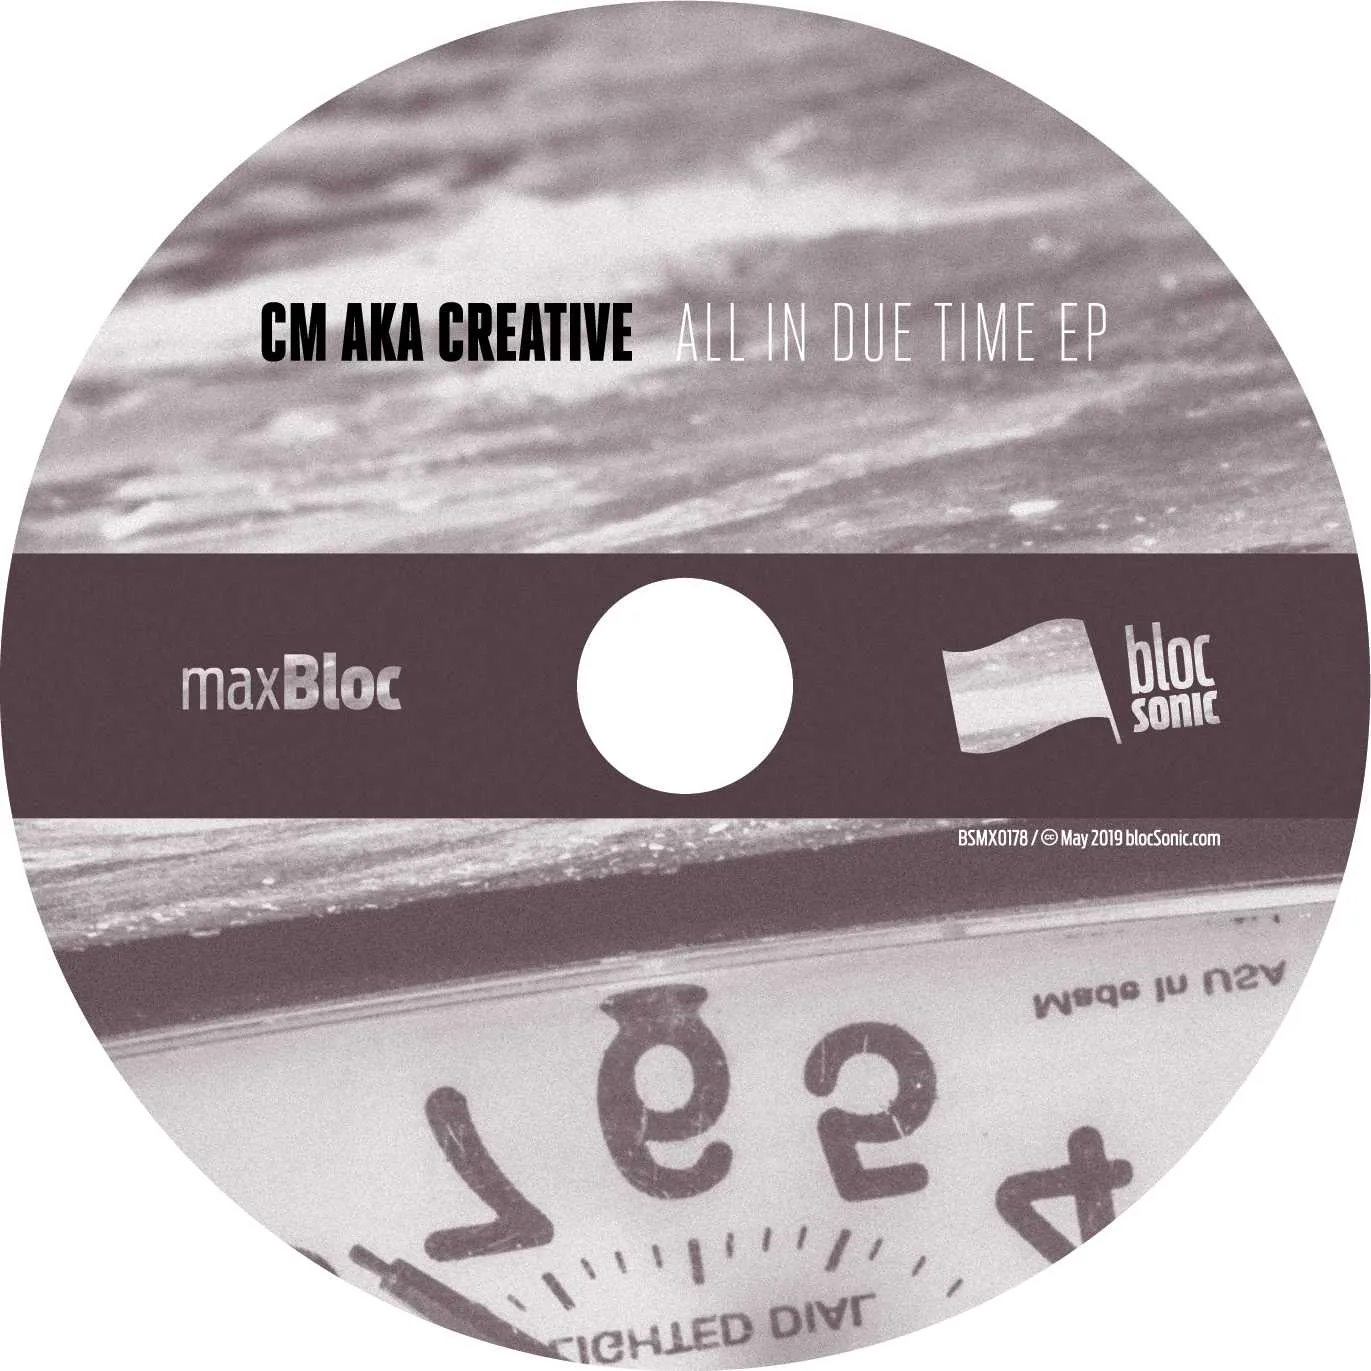 Album disc for “All In Due Time EP” by CM aka Creative